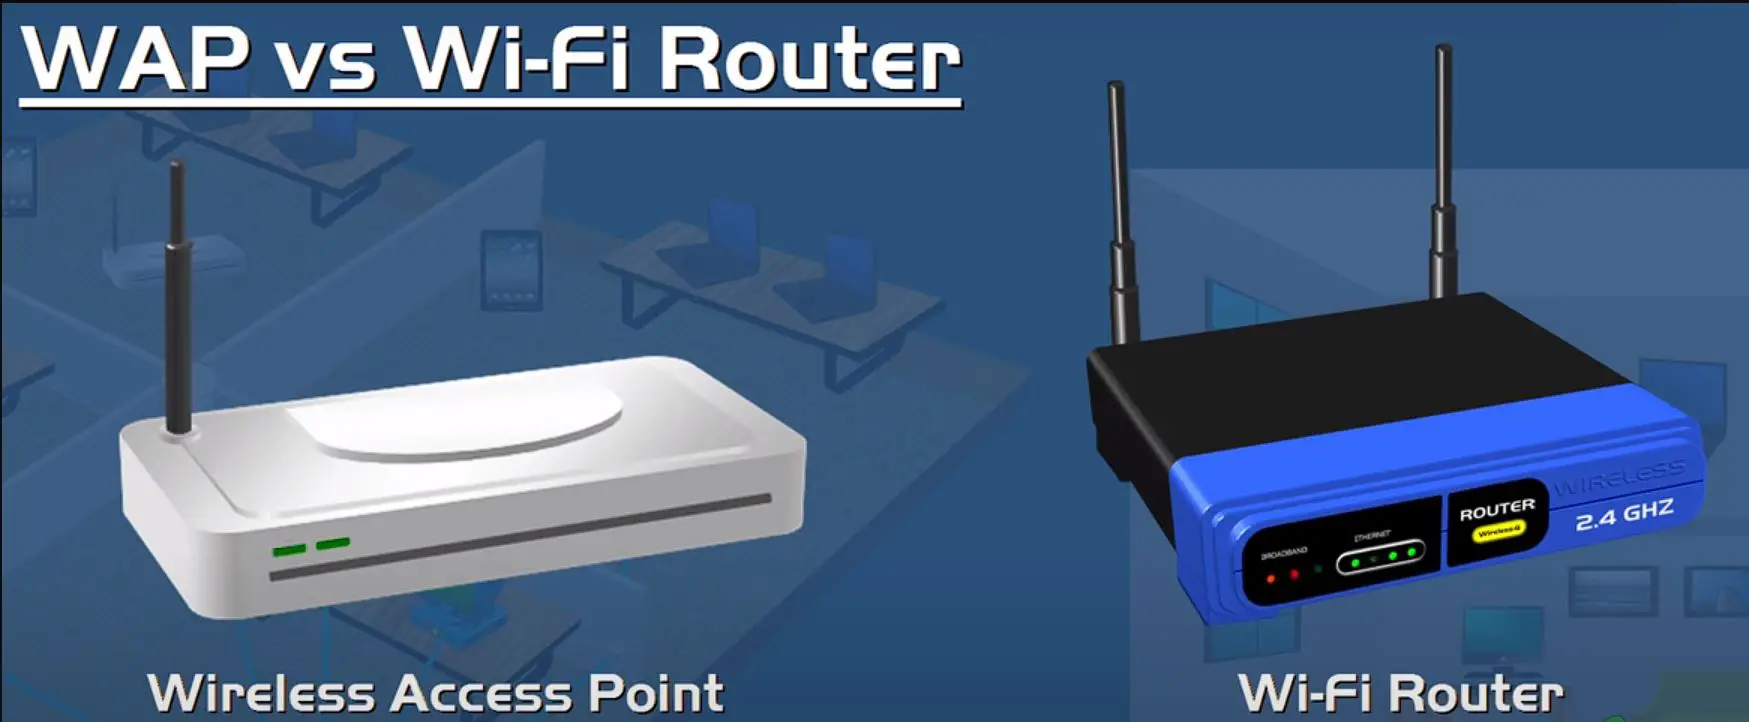 Wireless Access Point vs Router: Major Differences